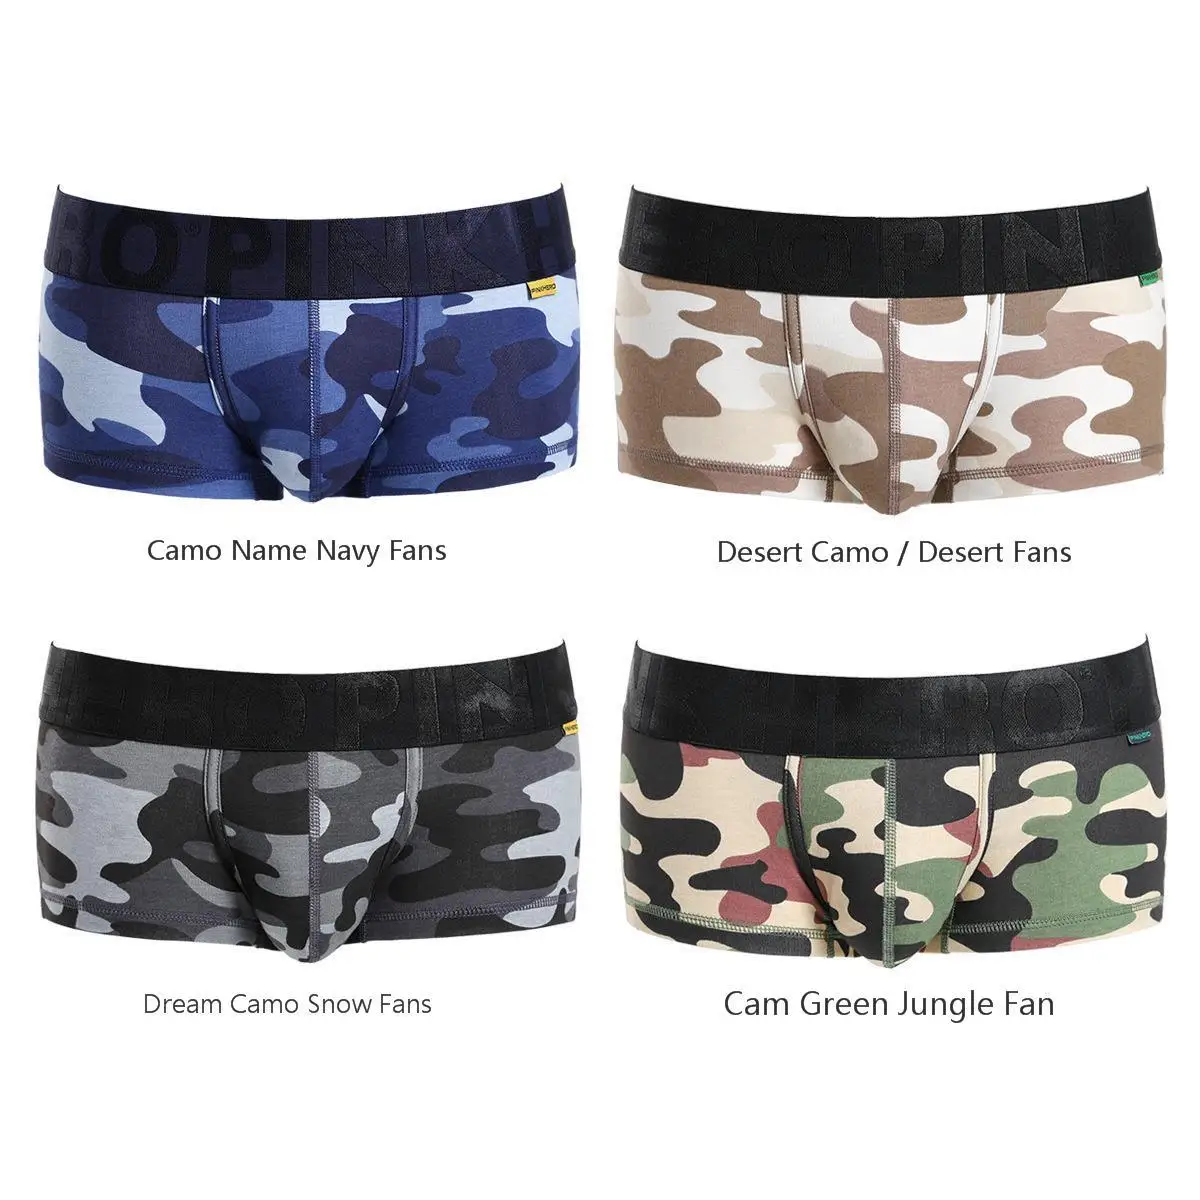 PINK HERO Male Pure Cotton Camouflage Printing Man Short Straight Angle Underpants boxershorts men underwear boxers